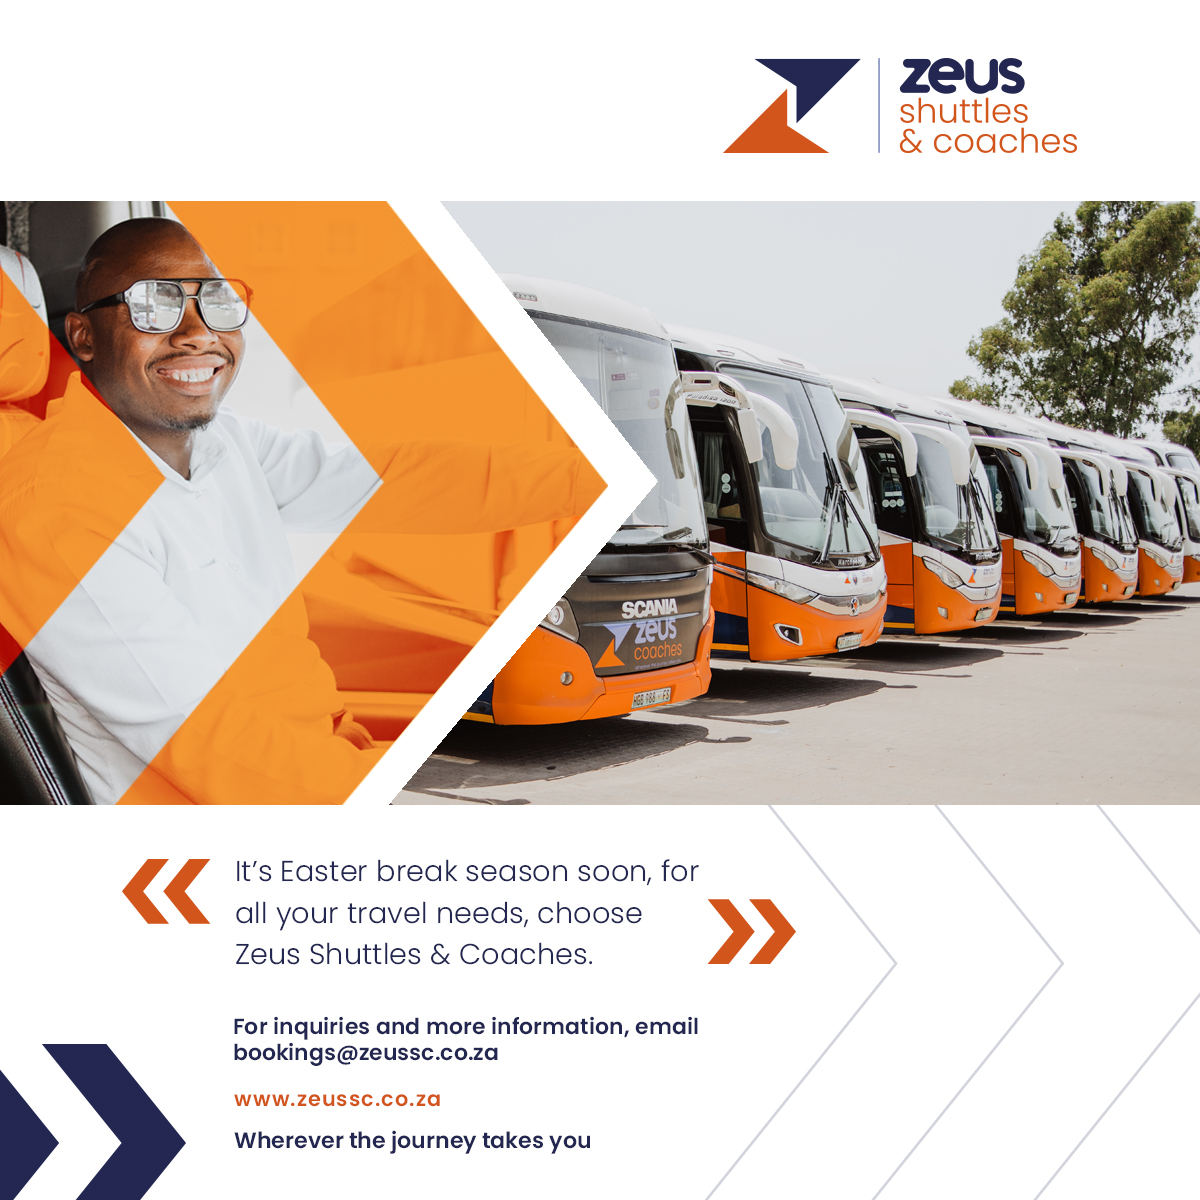 Whatever your destination this Easter, we’ll get you there.
Book your trip with Zeus Shuttles & Coaches.
For booking inquiries email bookings@zeussc.co.za or call us on 051 430 6451

#transportation #shuttleservice #shuttlebus #travelcoach #traveling  #longdistancetravel